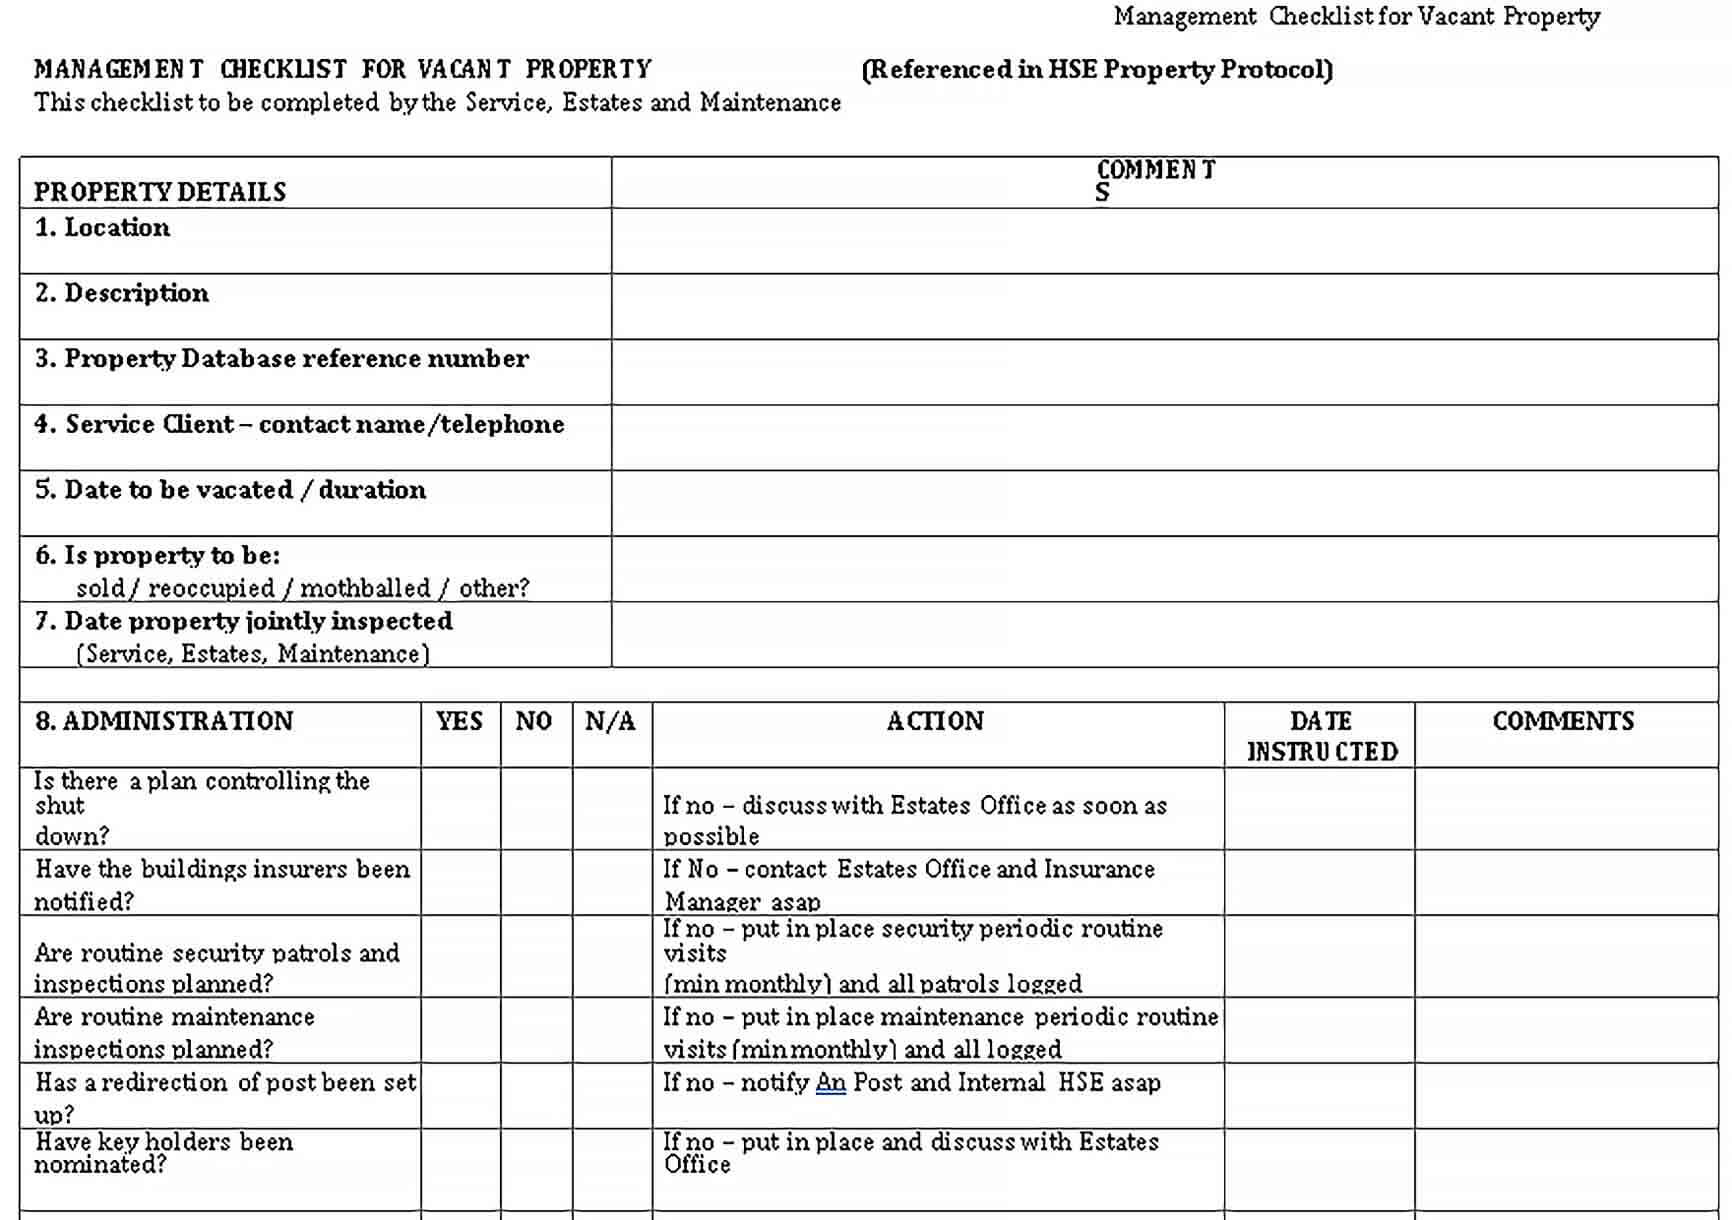 Sample vacant Property Management Checklist